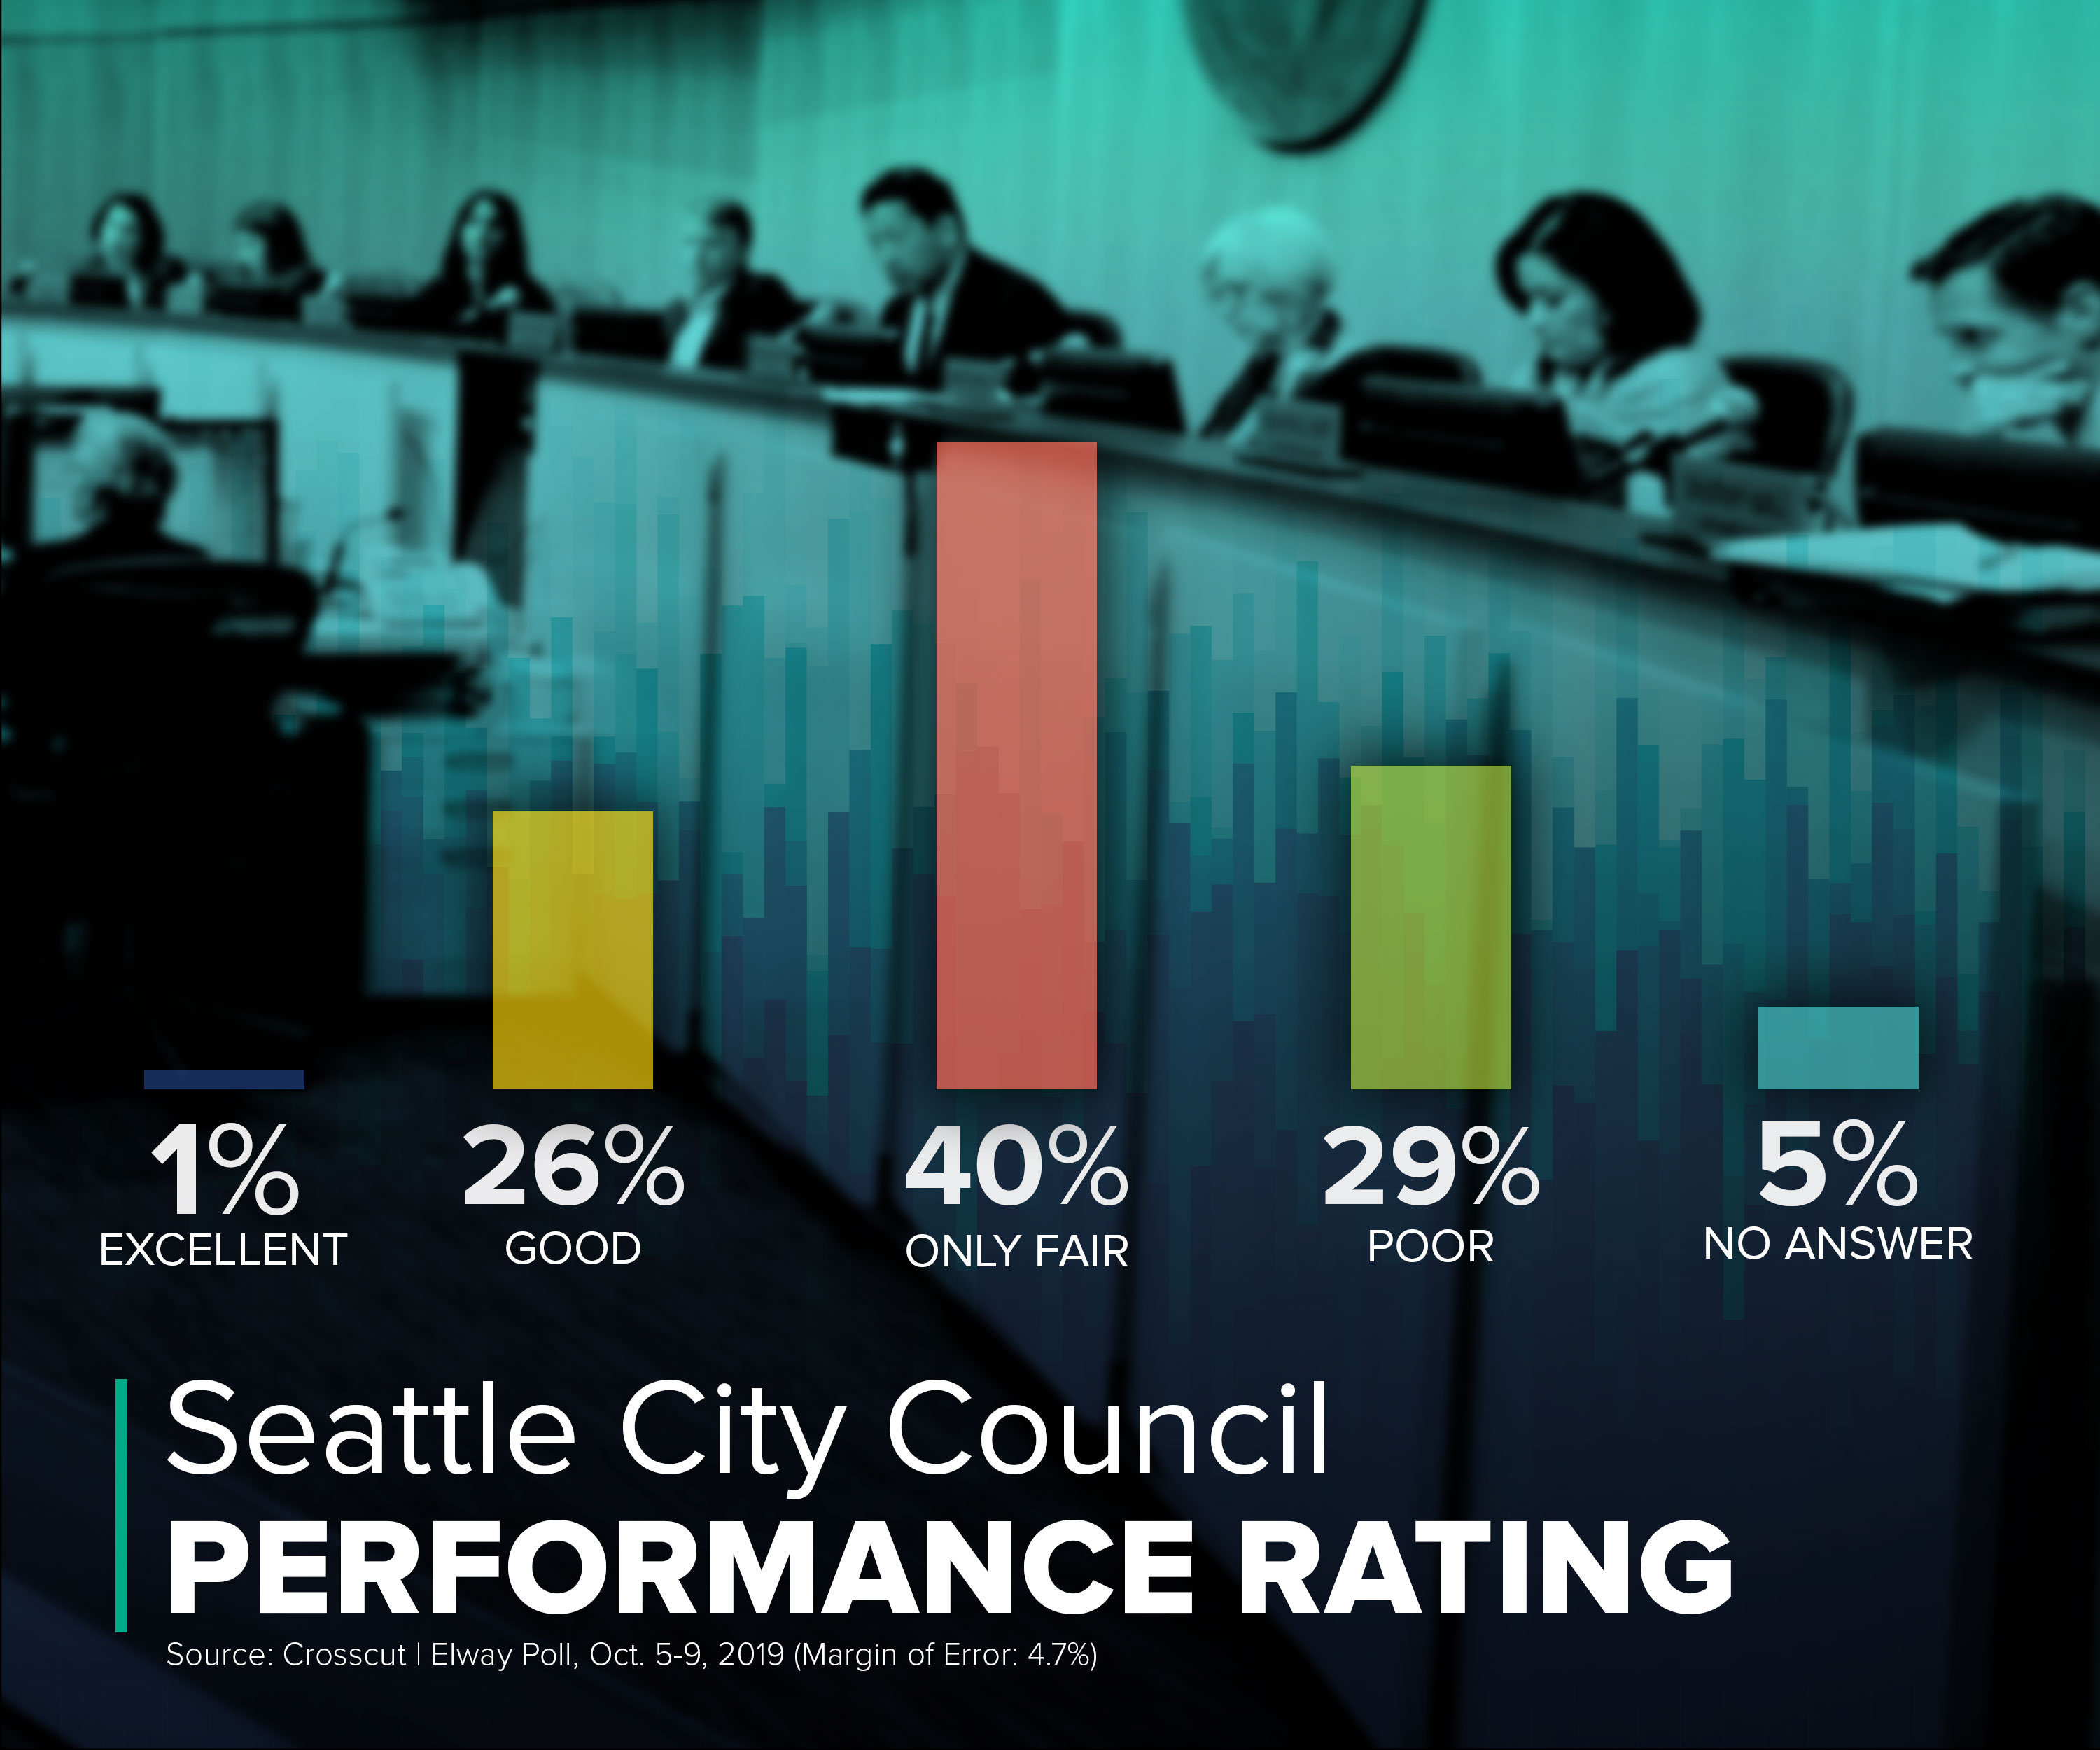 A graphic of the poll showing council approval. 1 percent say the council has been excellent, 26 percent say good, 40 percent say only fair, 29 percent say poor, 5 percent say no answer.